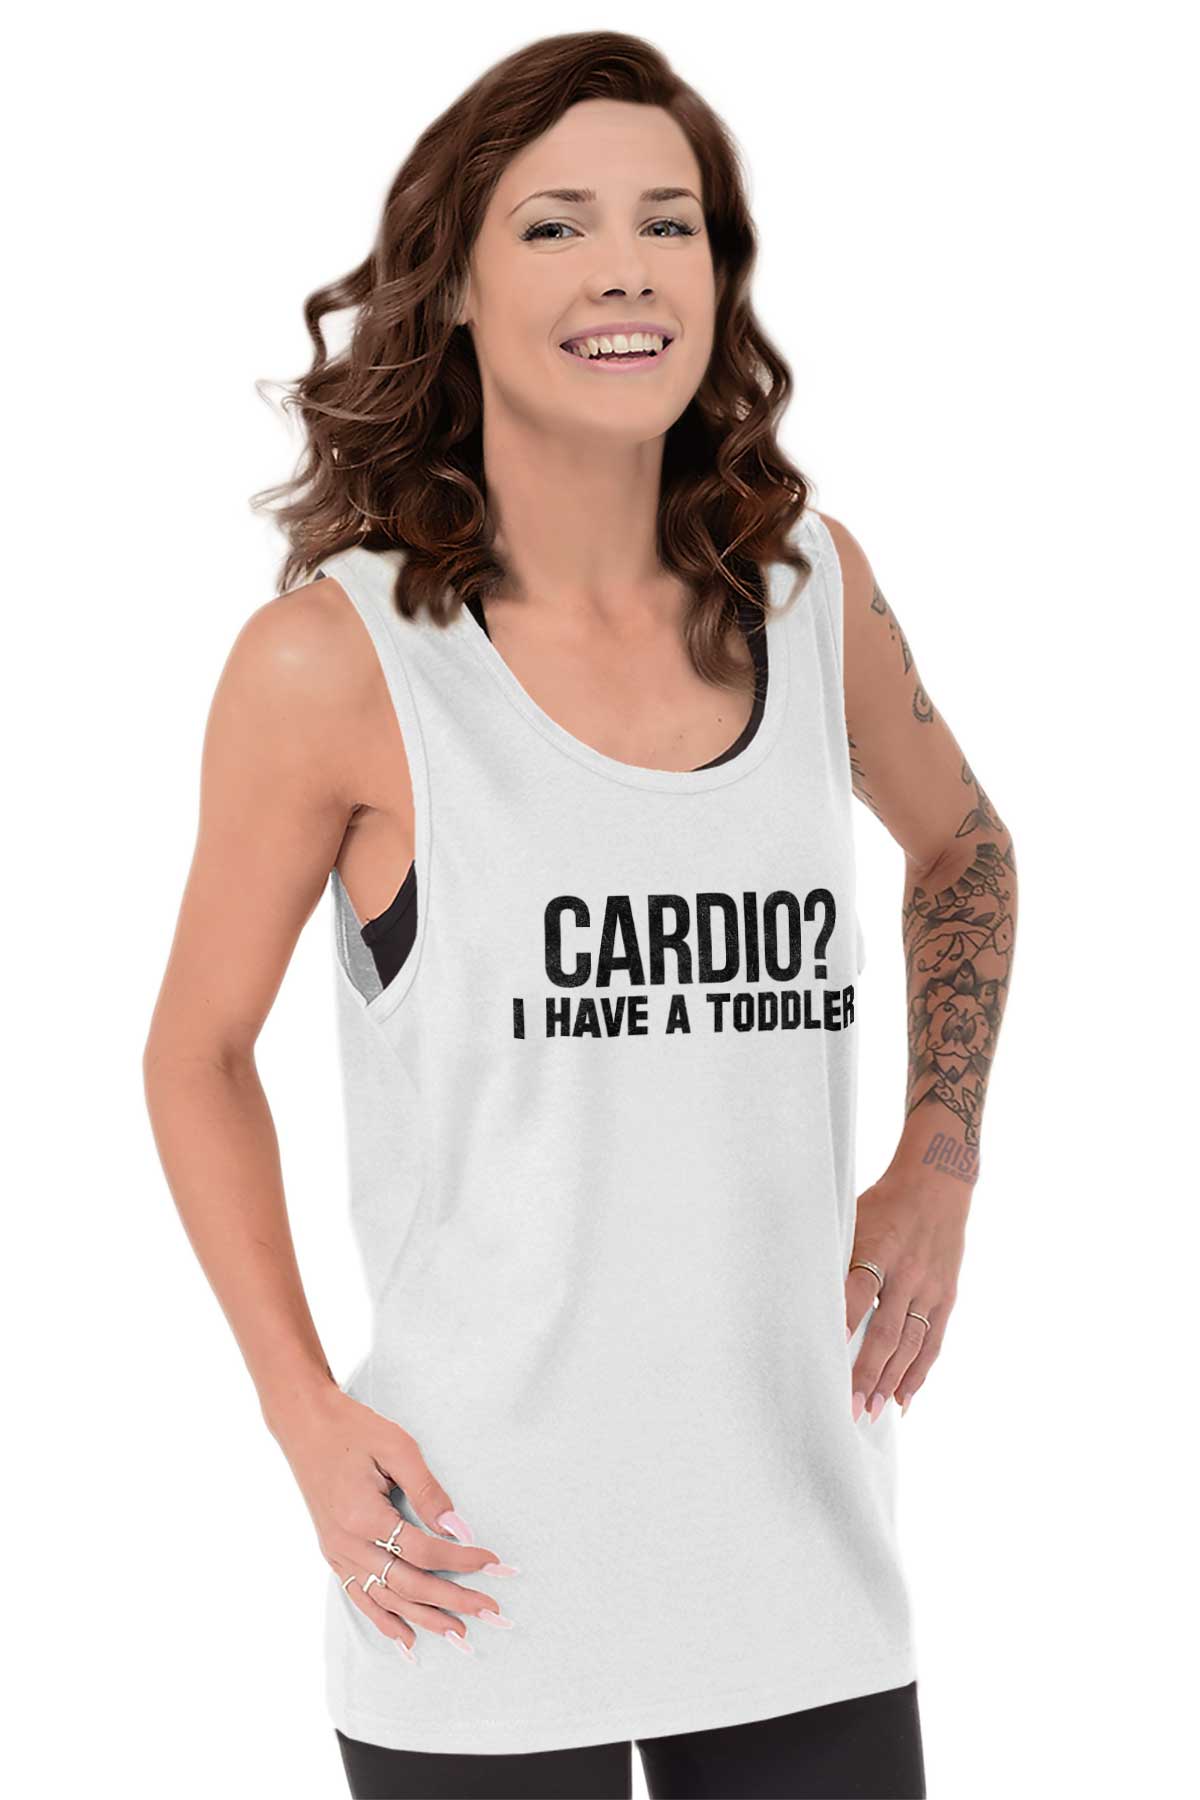 Cardio I Have a Toddler Funny Mom Gym Tank Top T Shirts Men Women Brisco Brands X - image 5 of 7